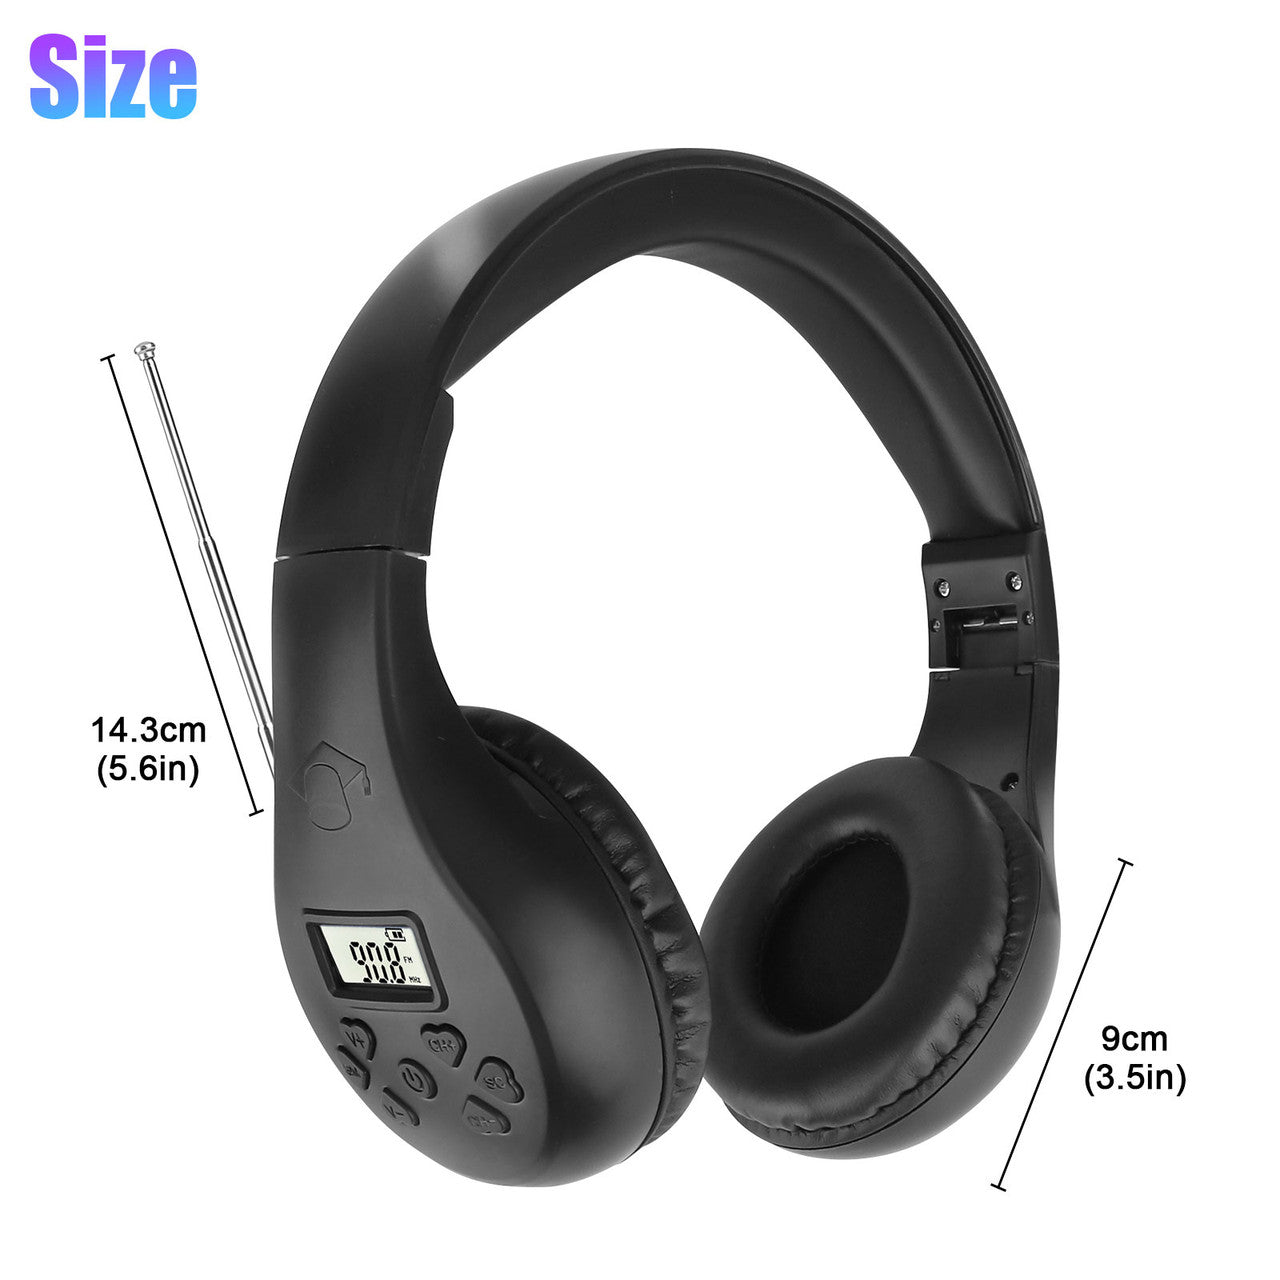 Portable FM Radio Headphones Ear Muffs with AUX, Wireless Headset with Build-In Radio